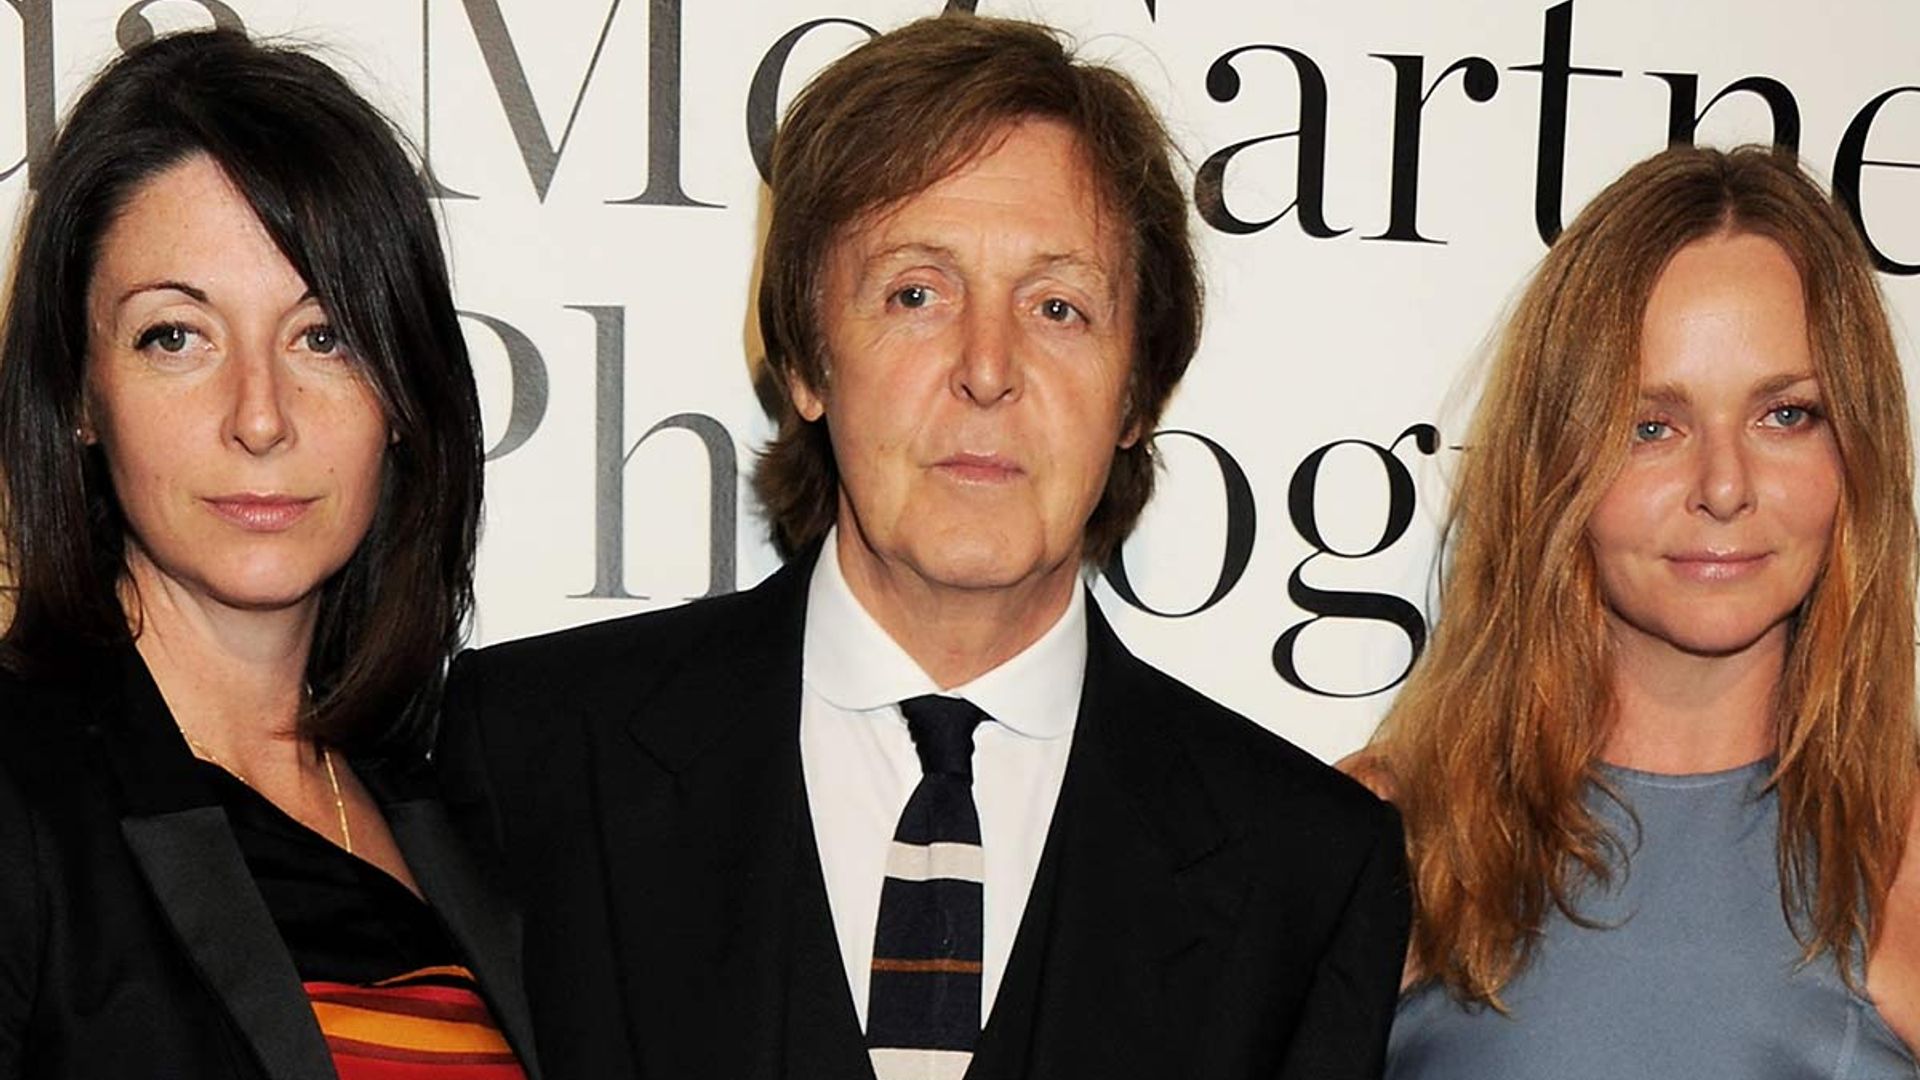 Paul McCartney serenaded by daughters in rare family footage for joyous